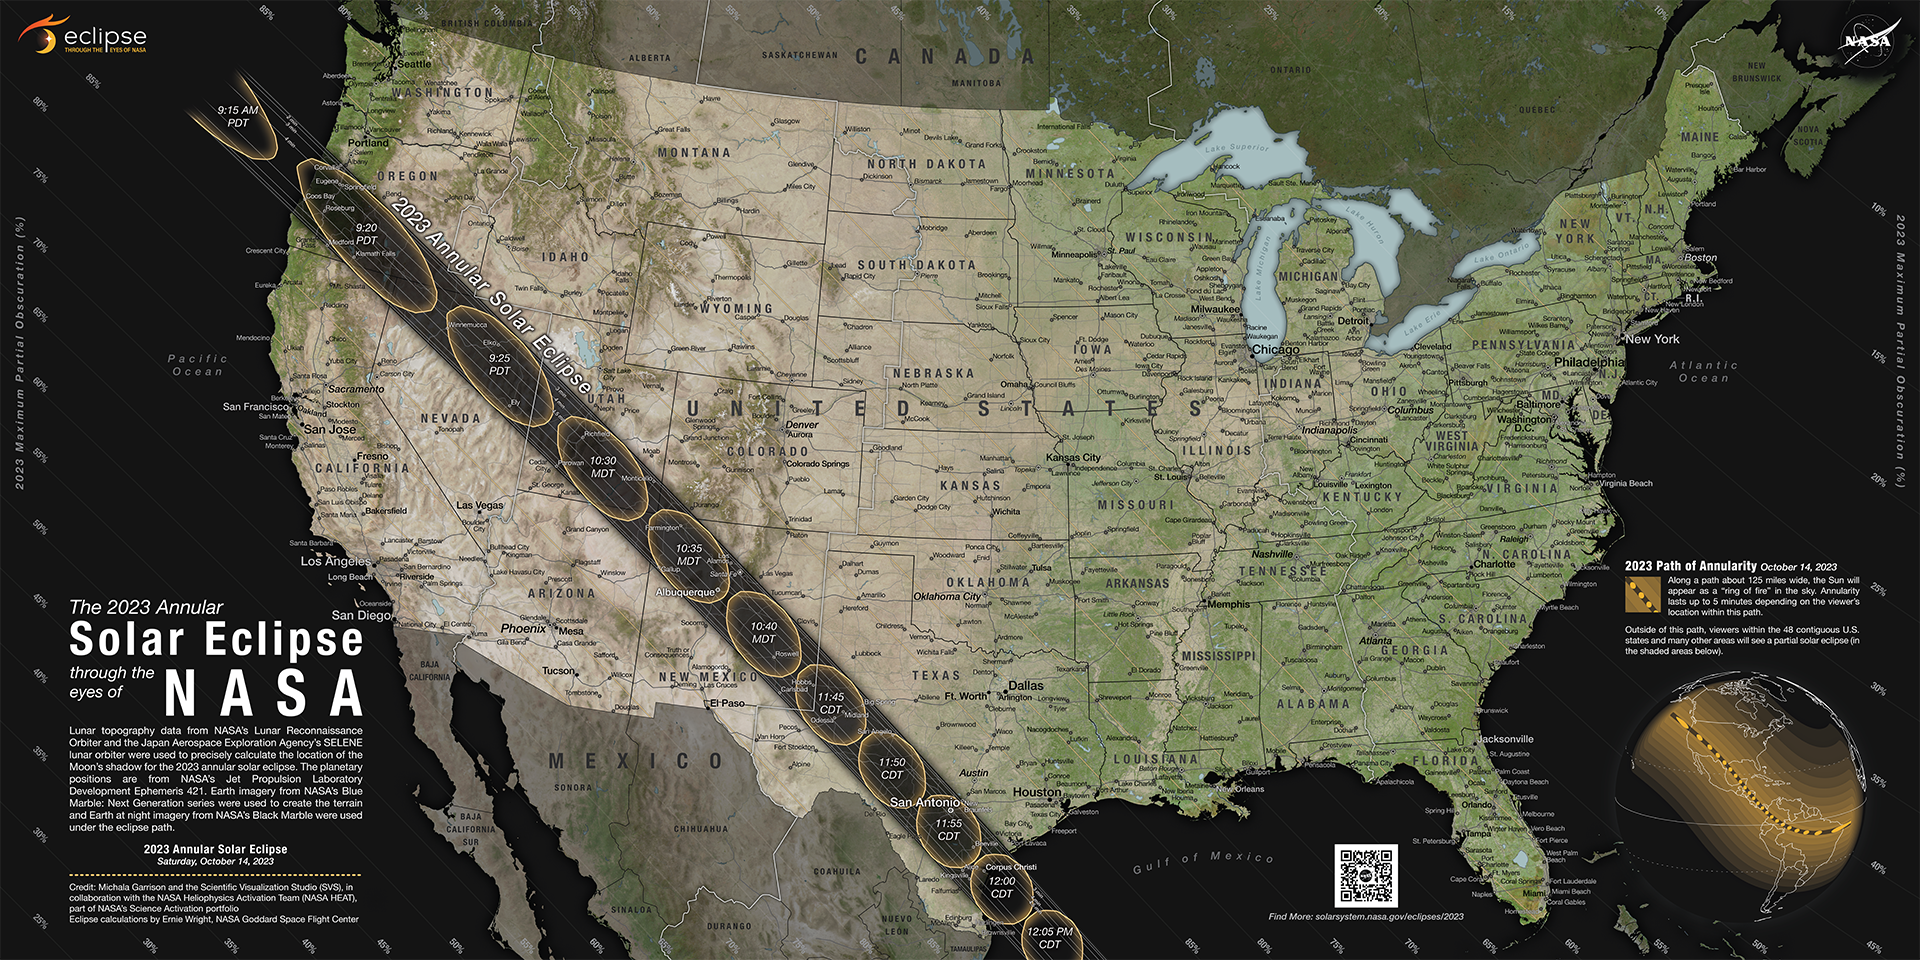 The path of annularity and partial contours crossing the U.S. for the 2023 annular solar eclipse occurring on October 14, 2023.